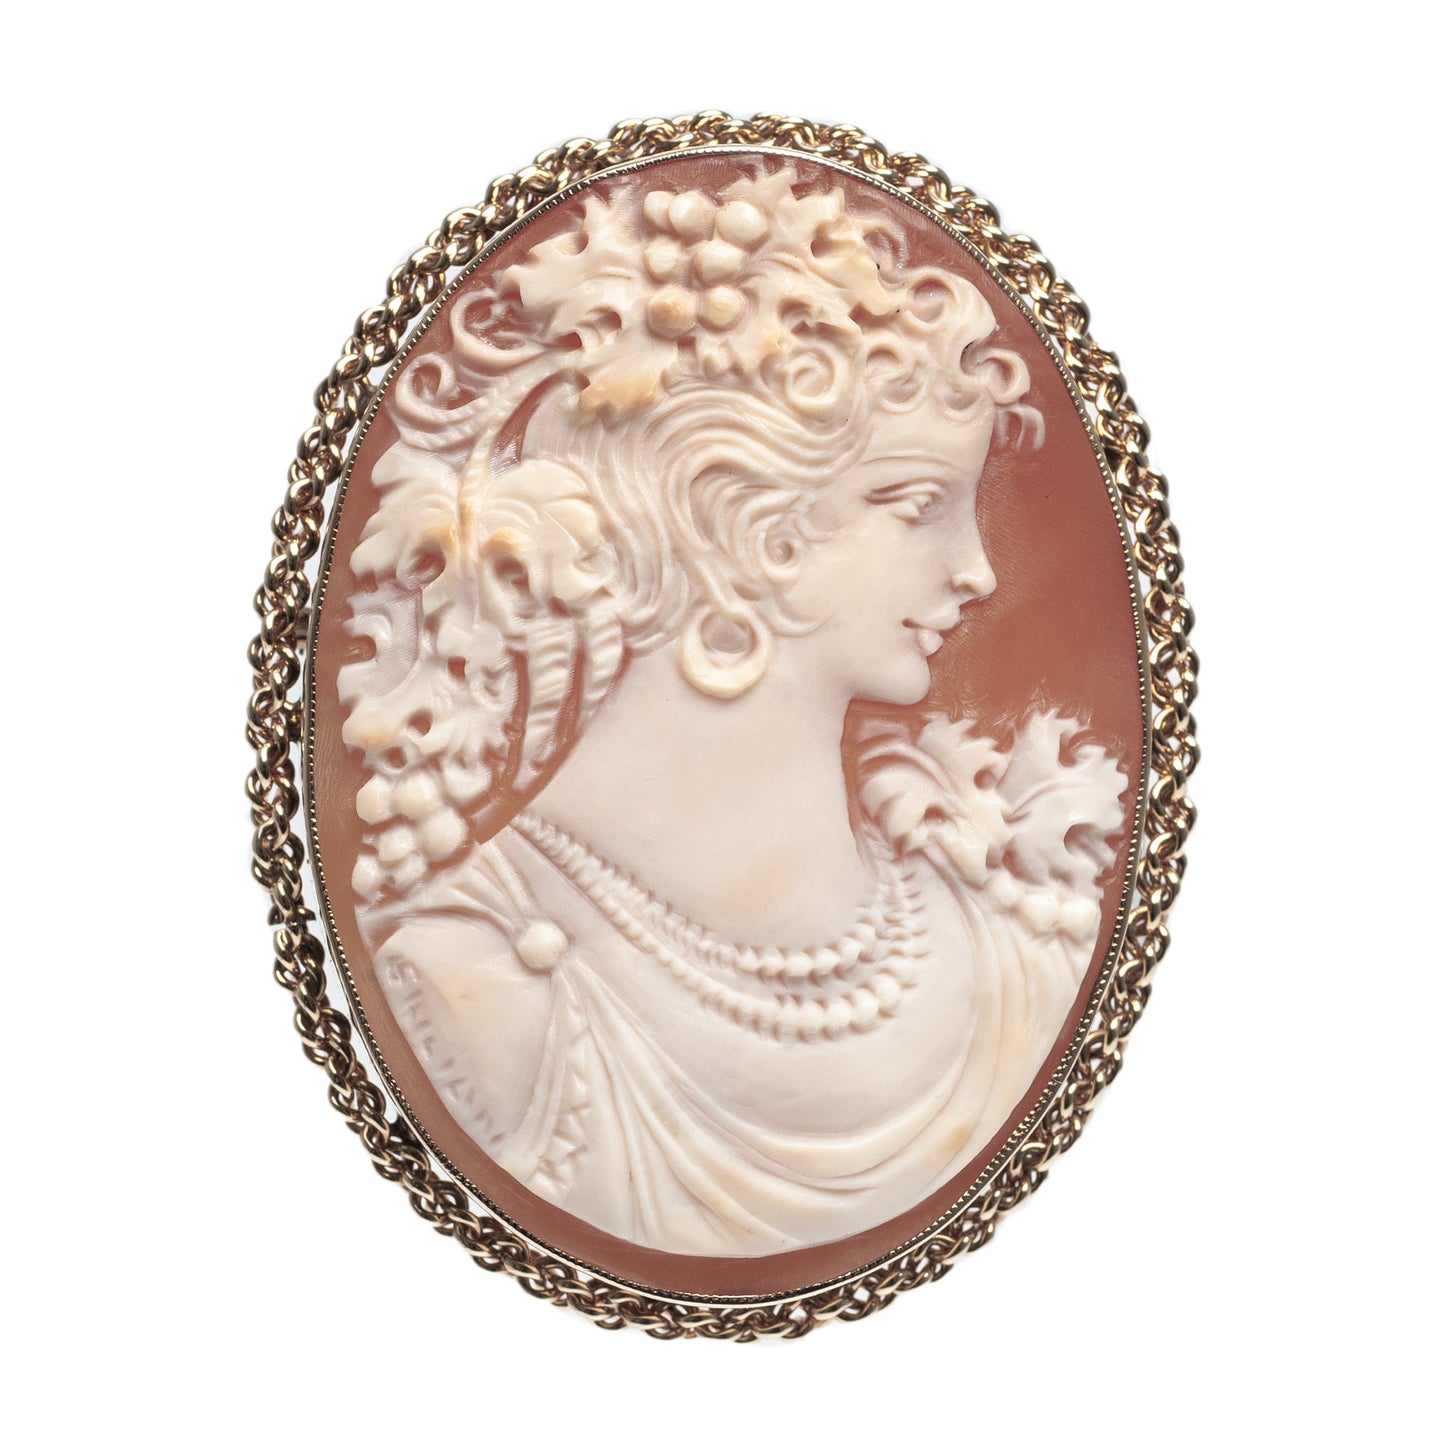 9ct Gold Mount Cameo Brooch Vintage Fine Quality Large Carved Shell Portrait  (Code A445)